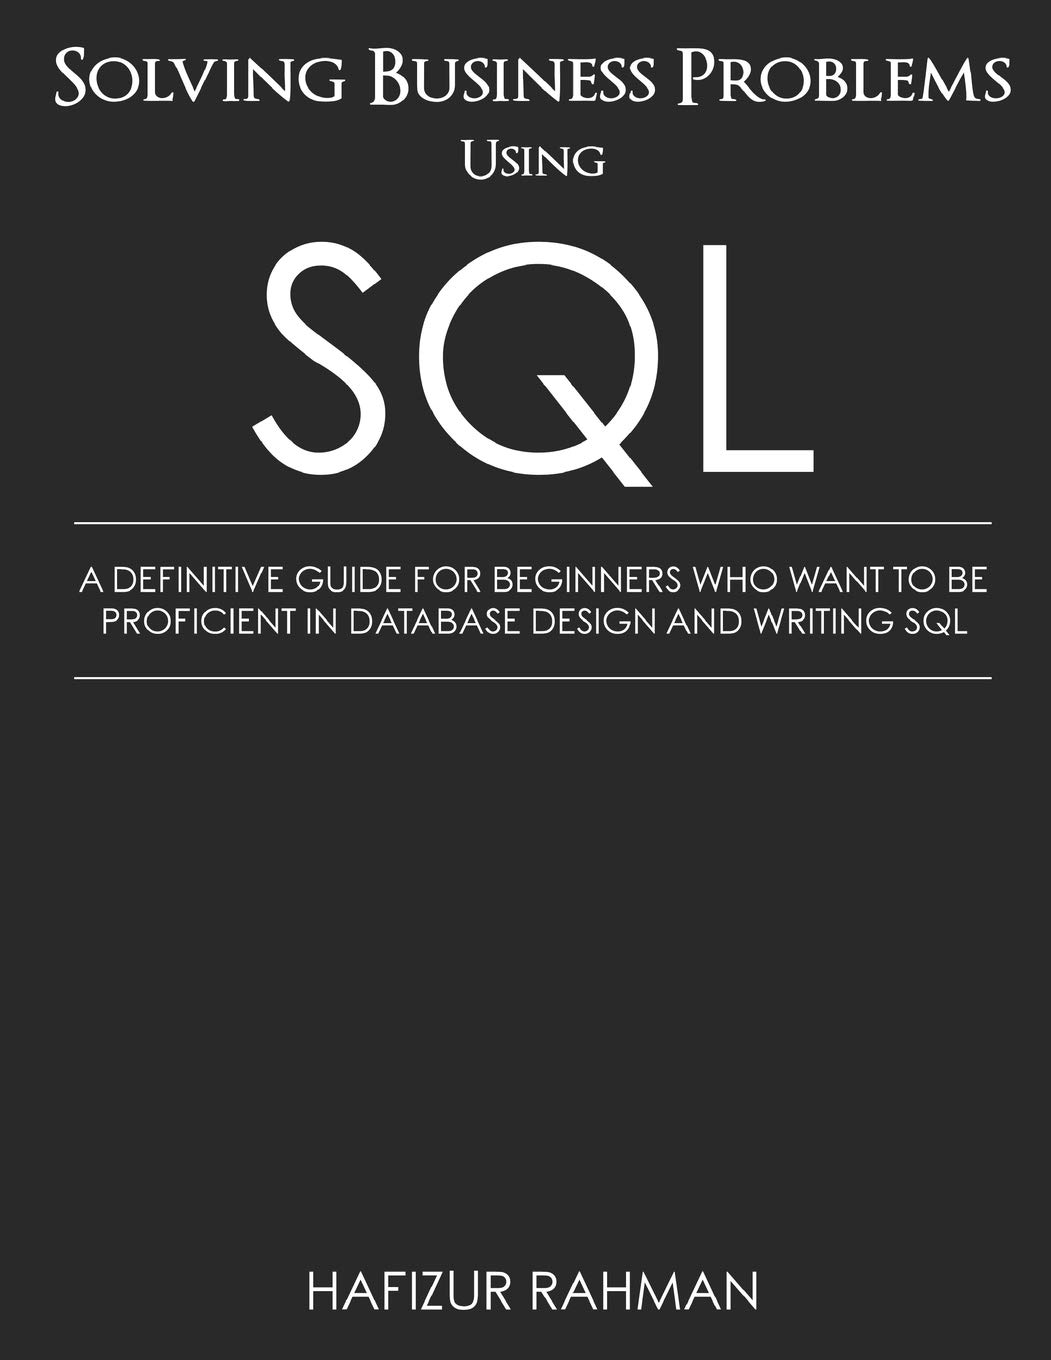 Solving Business Problems Using SQL: A Definitive Guide for Beginners Who Want to Be Proficient in Database Design and Writing SQL